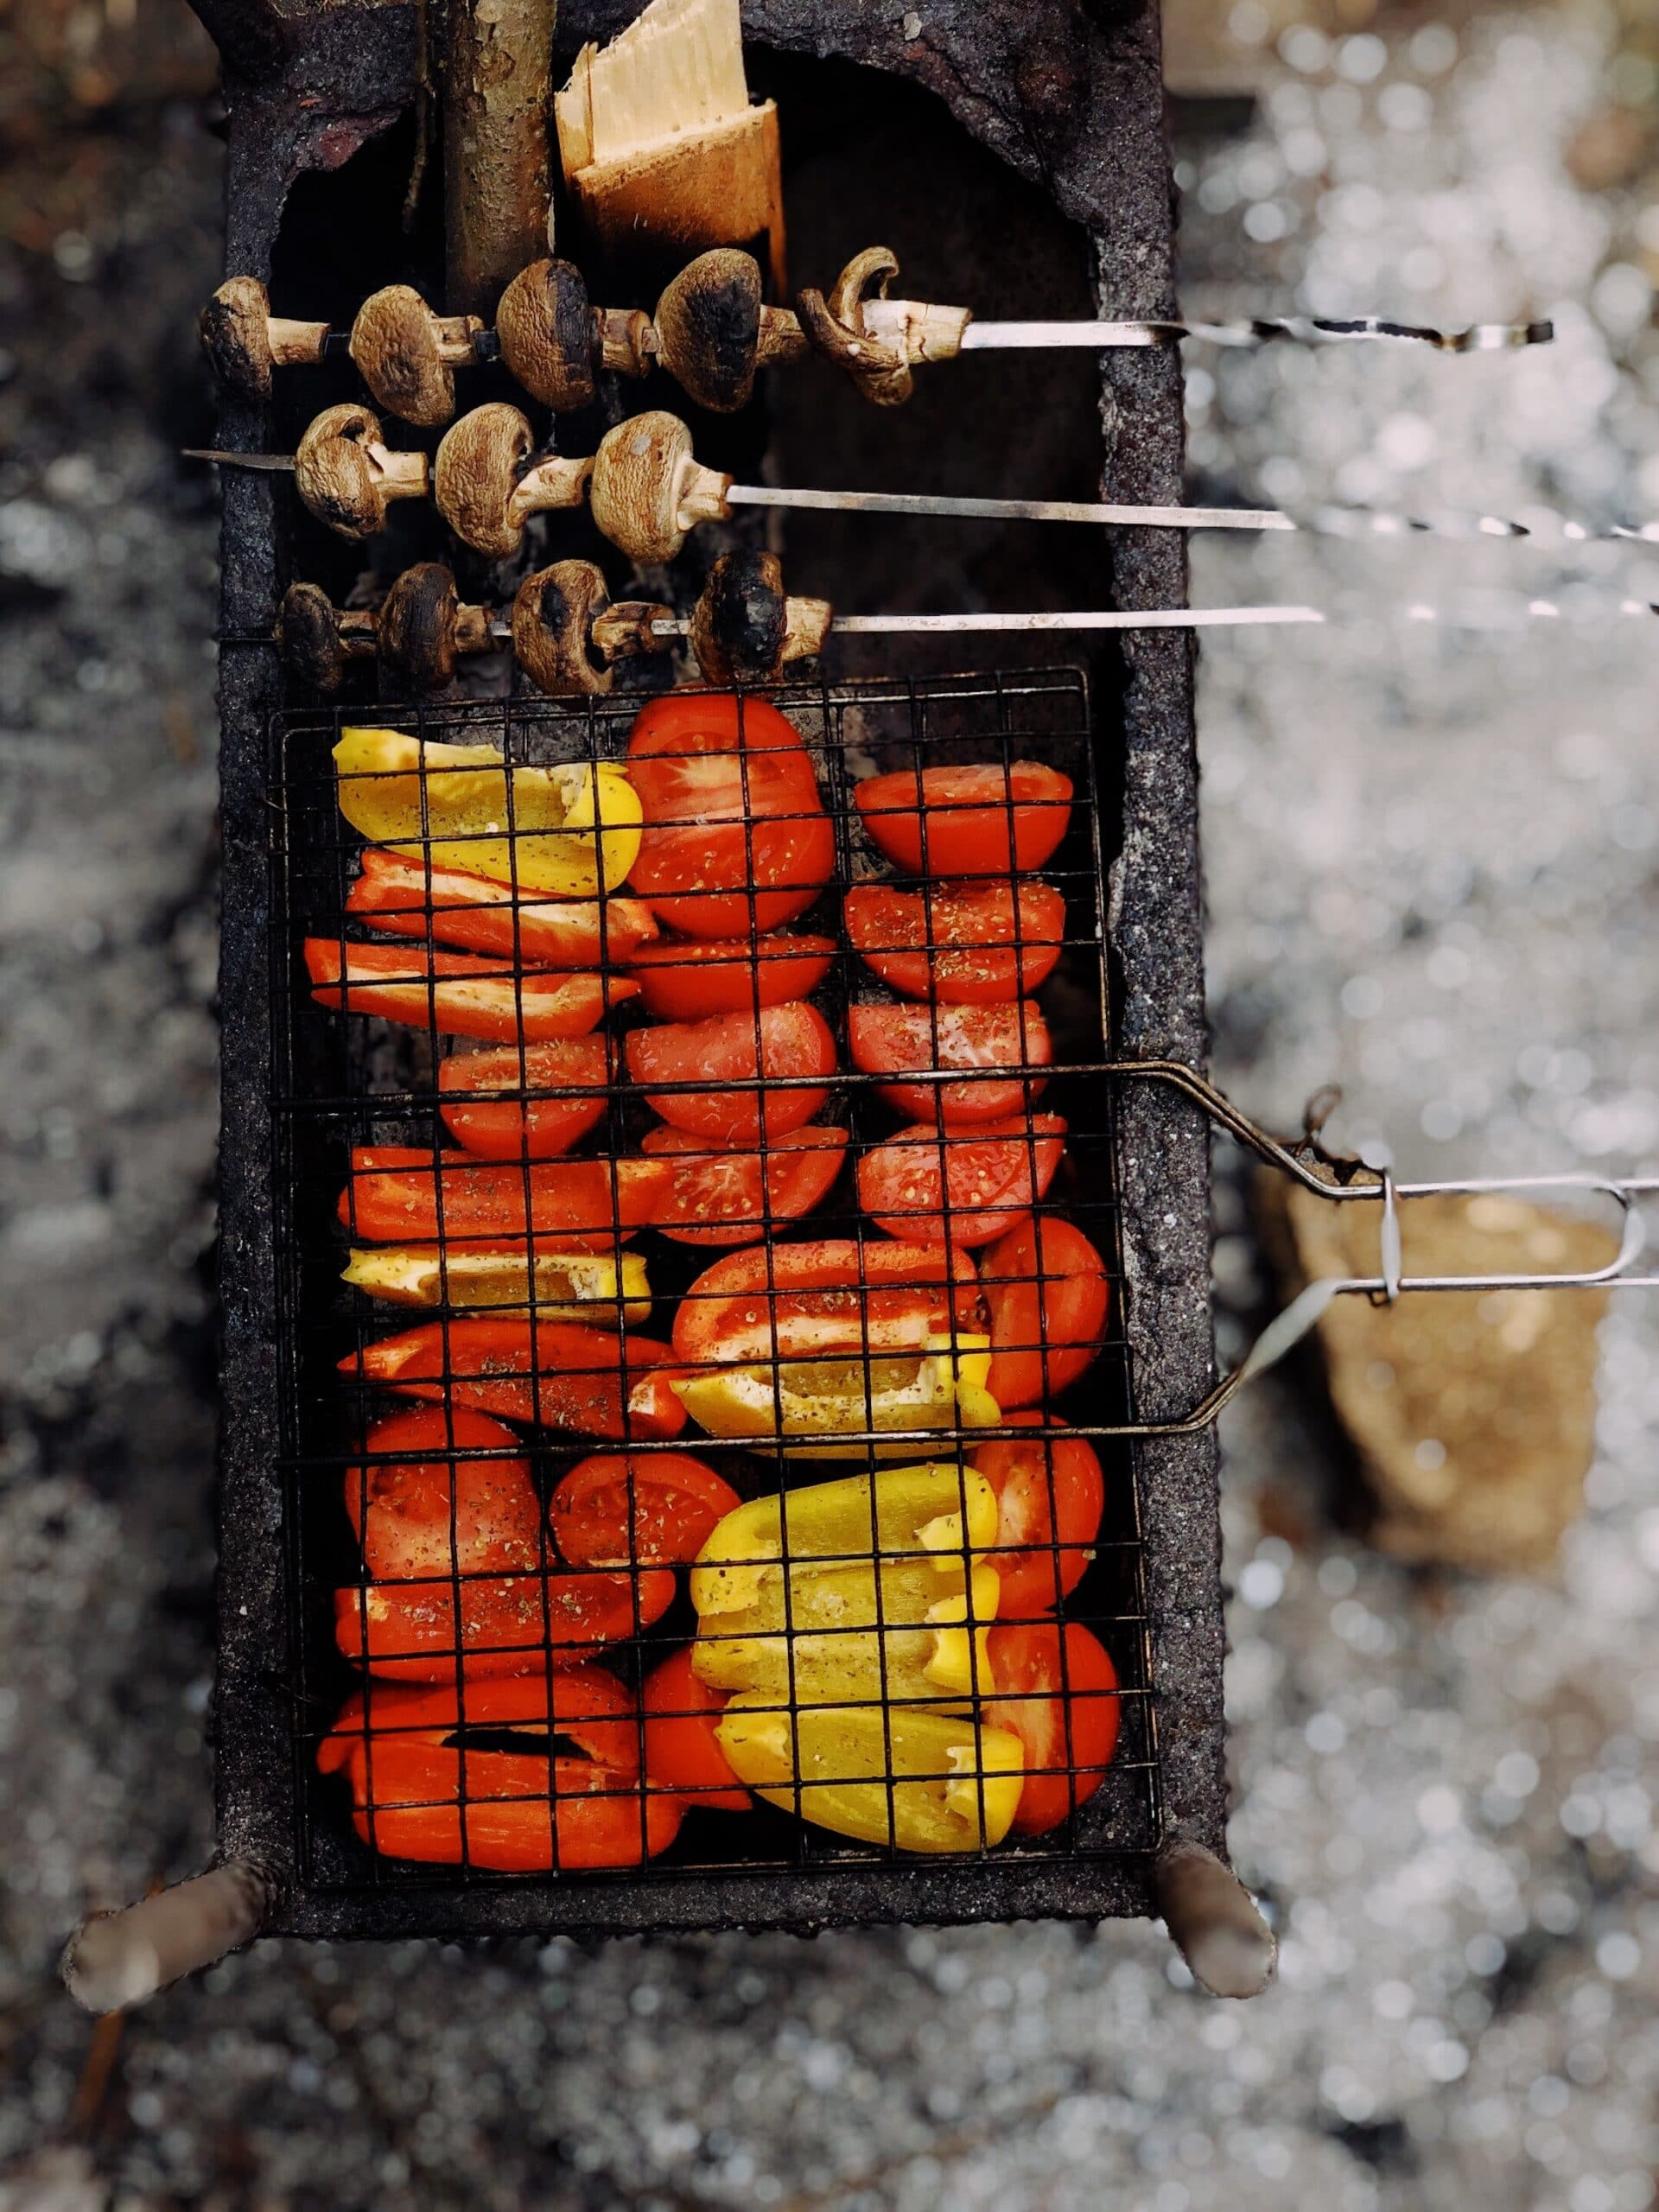 Grilling vegetables - BBQ for beginners